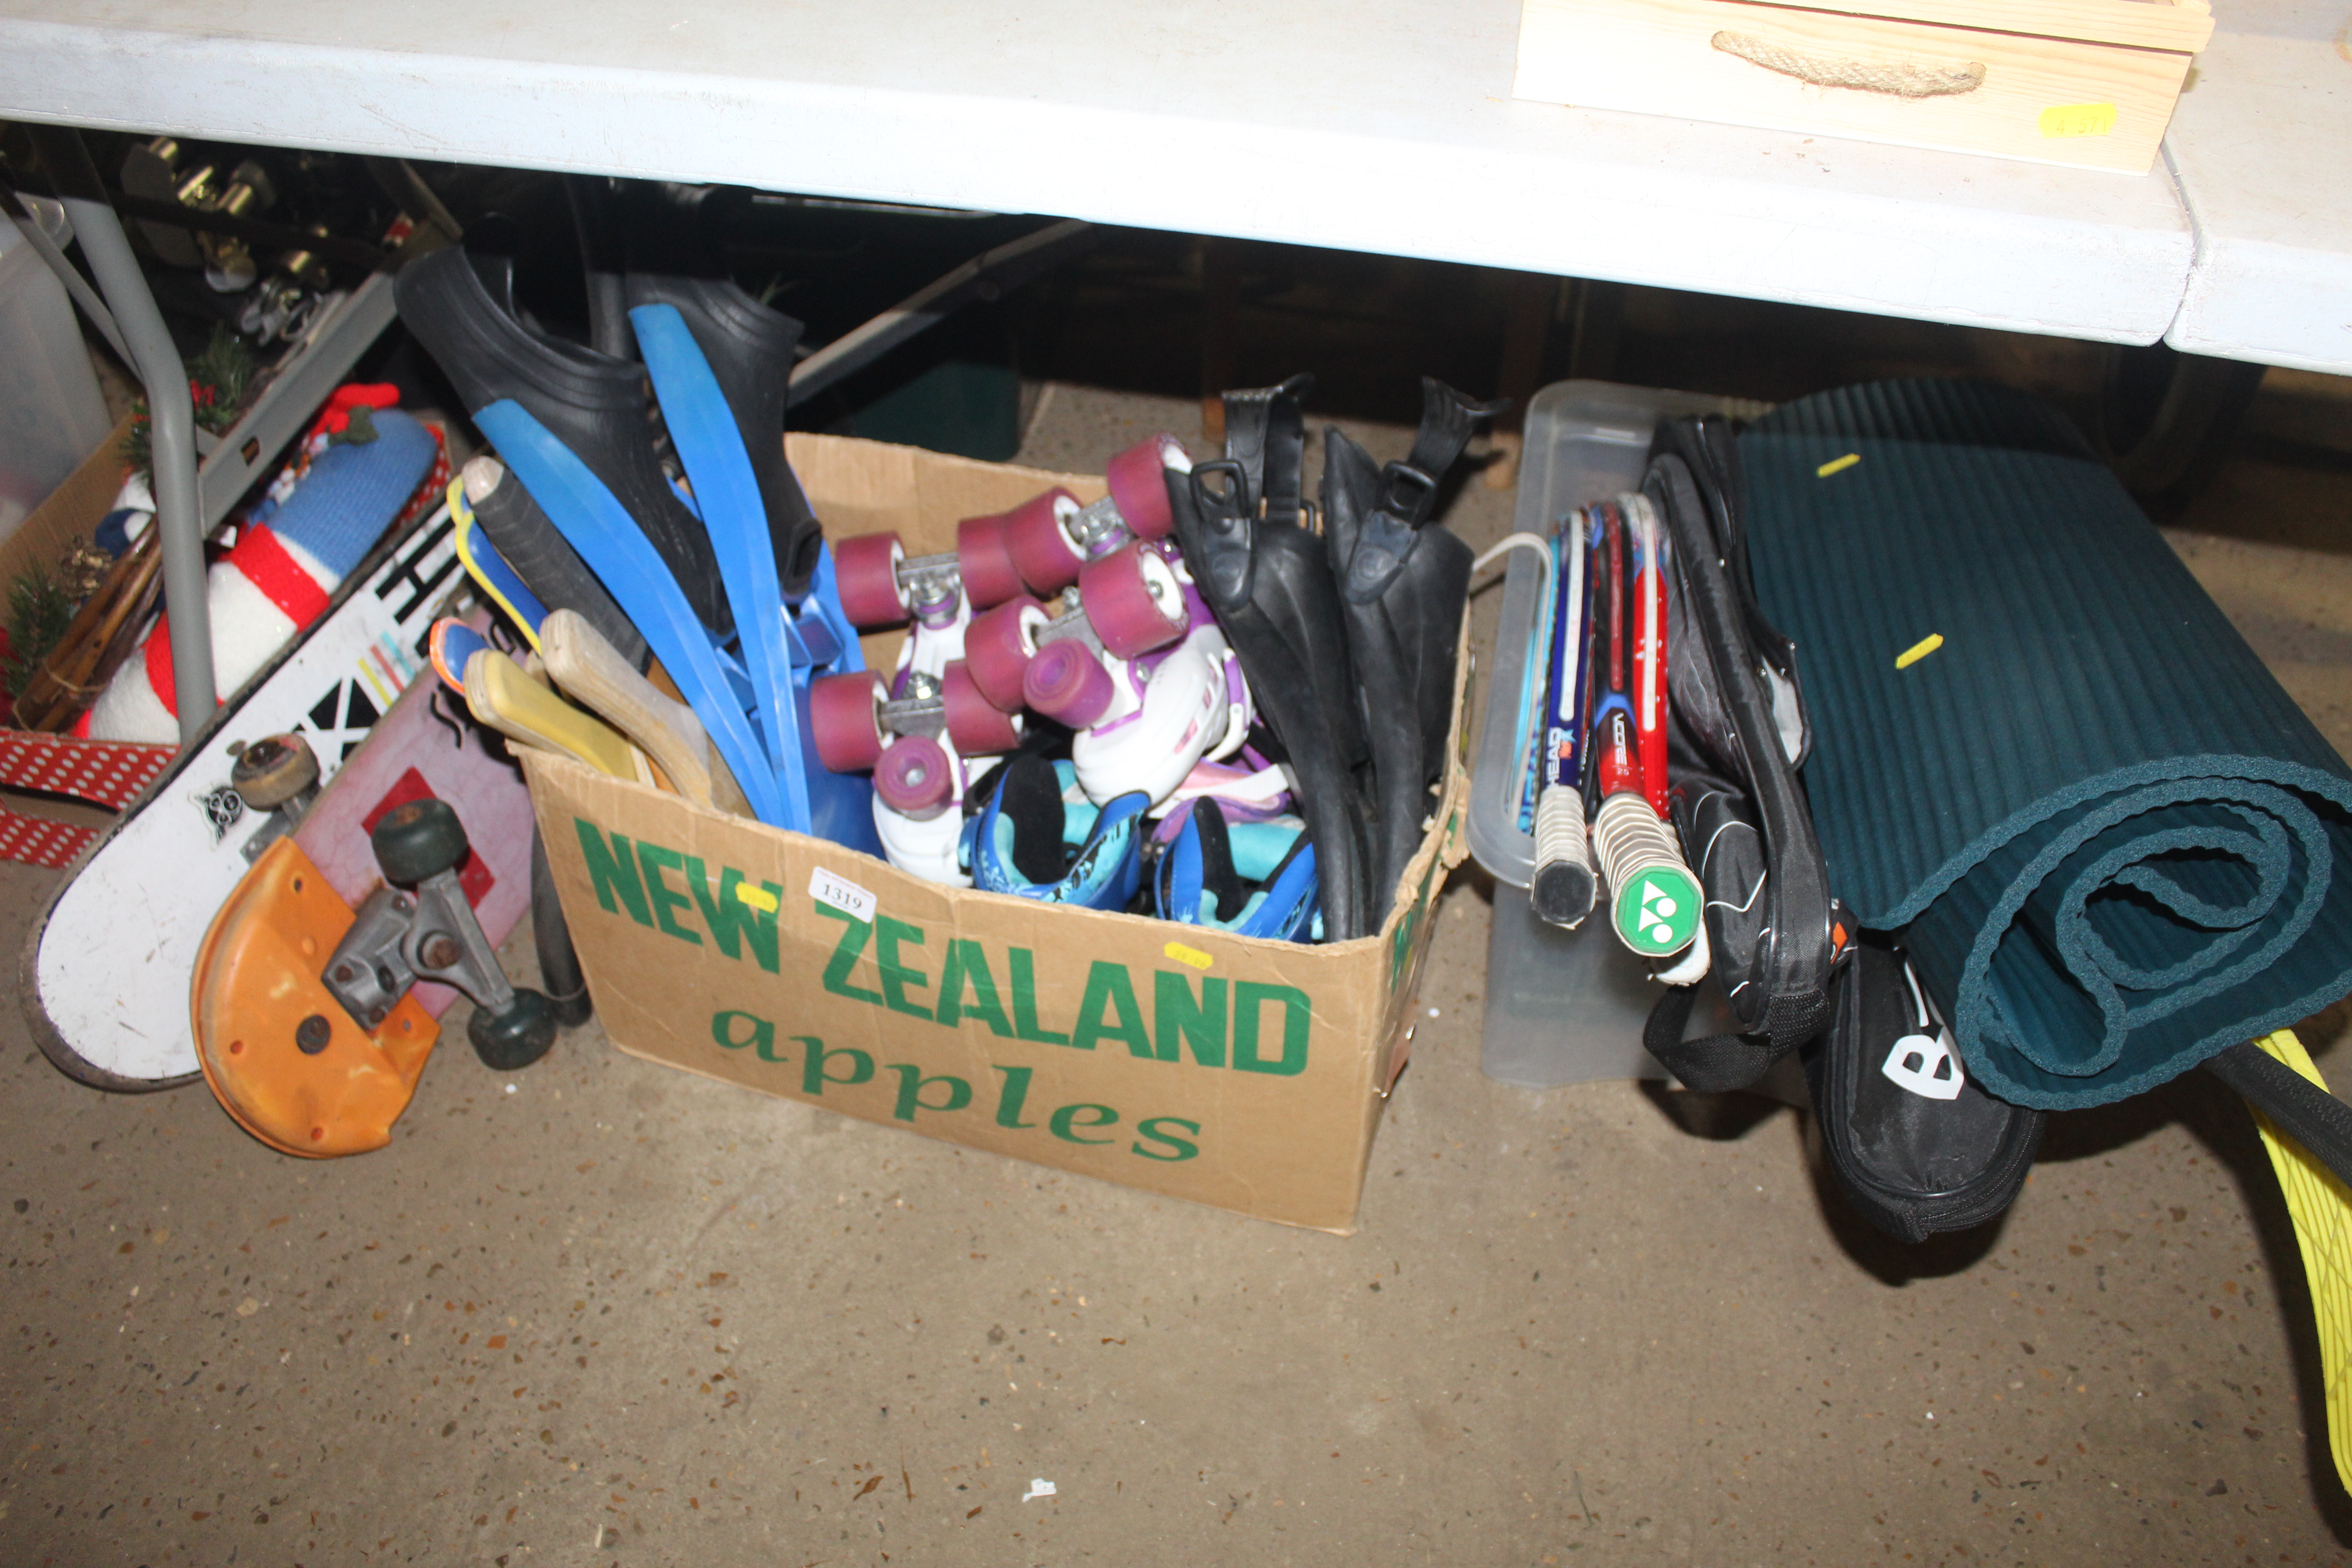 A quantity of wooden paddles, roller skating shoes, snorkelling flippers, a quantity of various